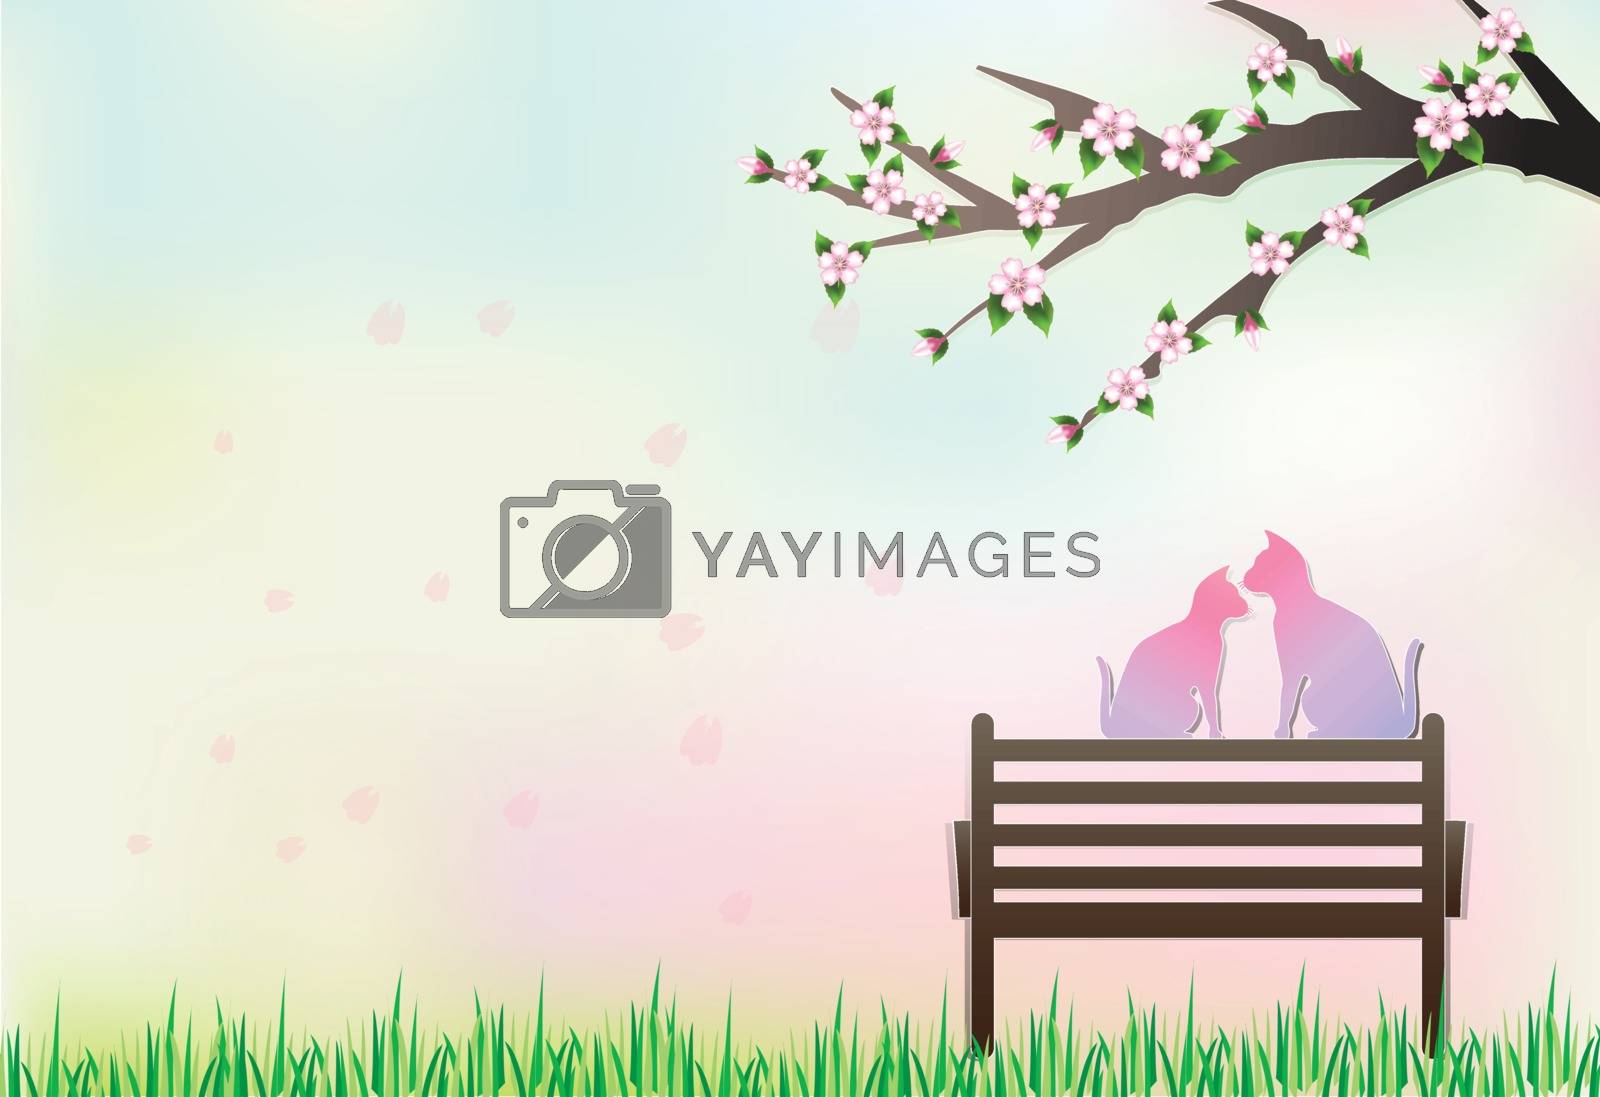 Royalty free image of Cats sitting on the bench under Cherry blossom tree and petals f by Kheat